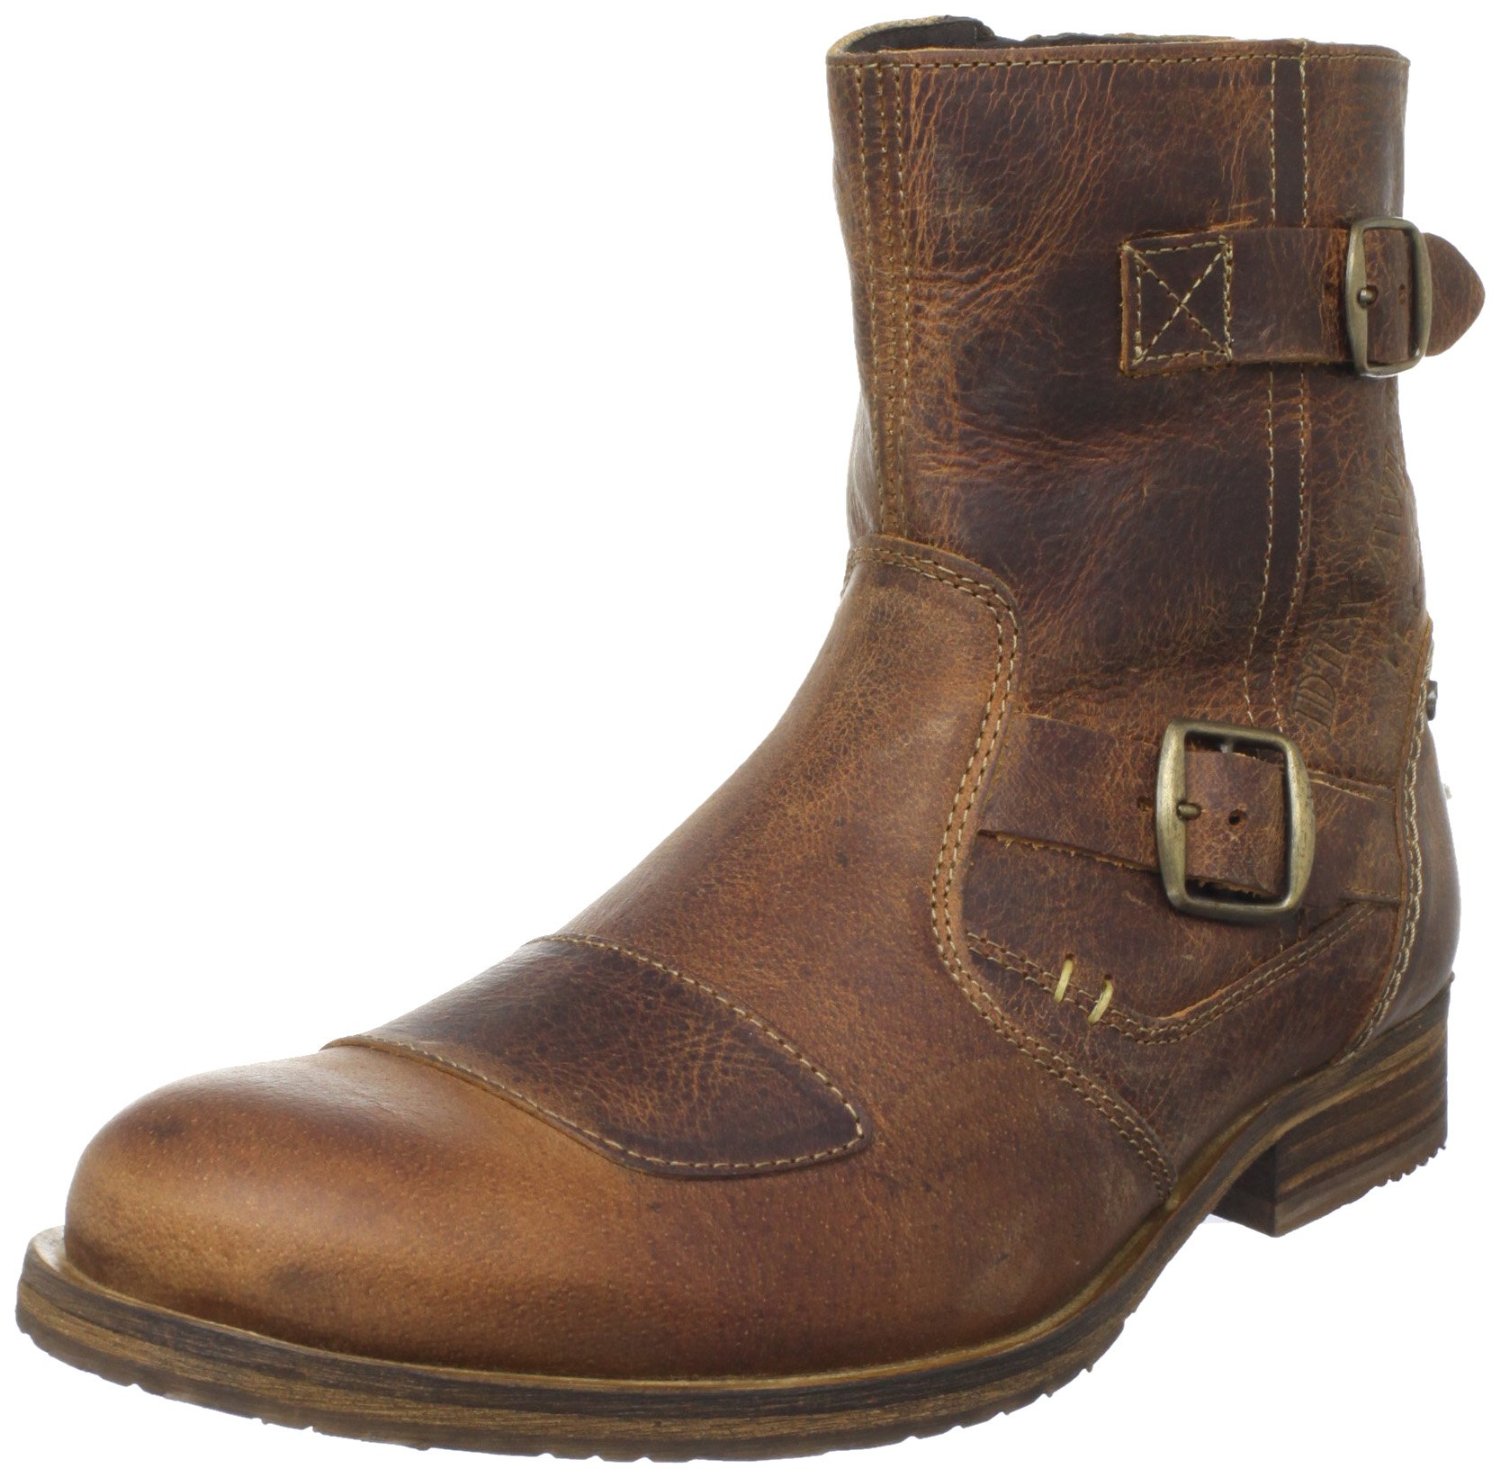 ... Motorcycle Boot Steve Madden Classic Motorcycle Boot by Steve Madden